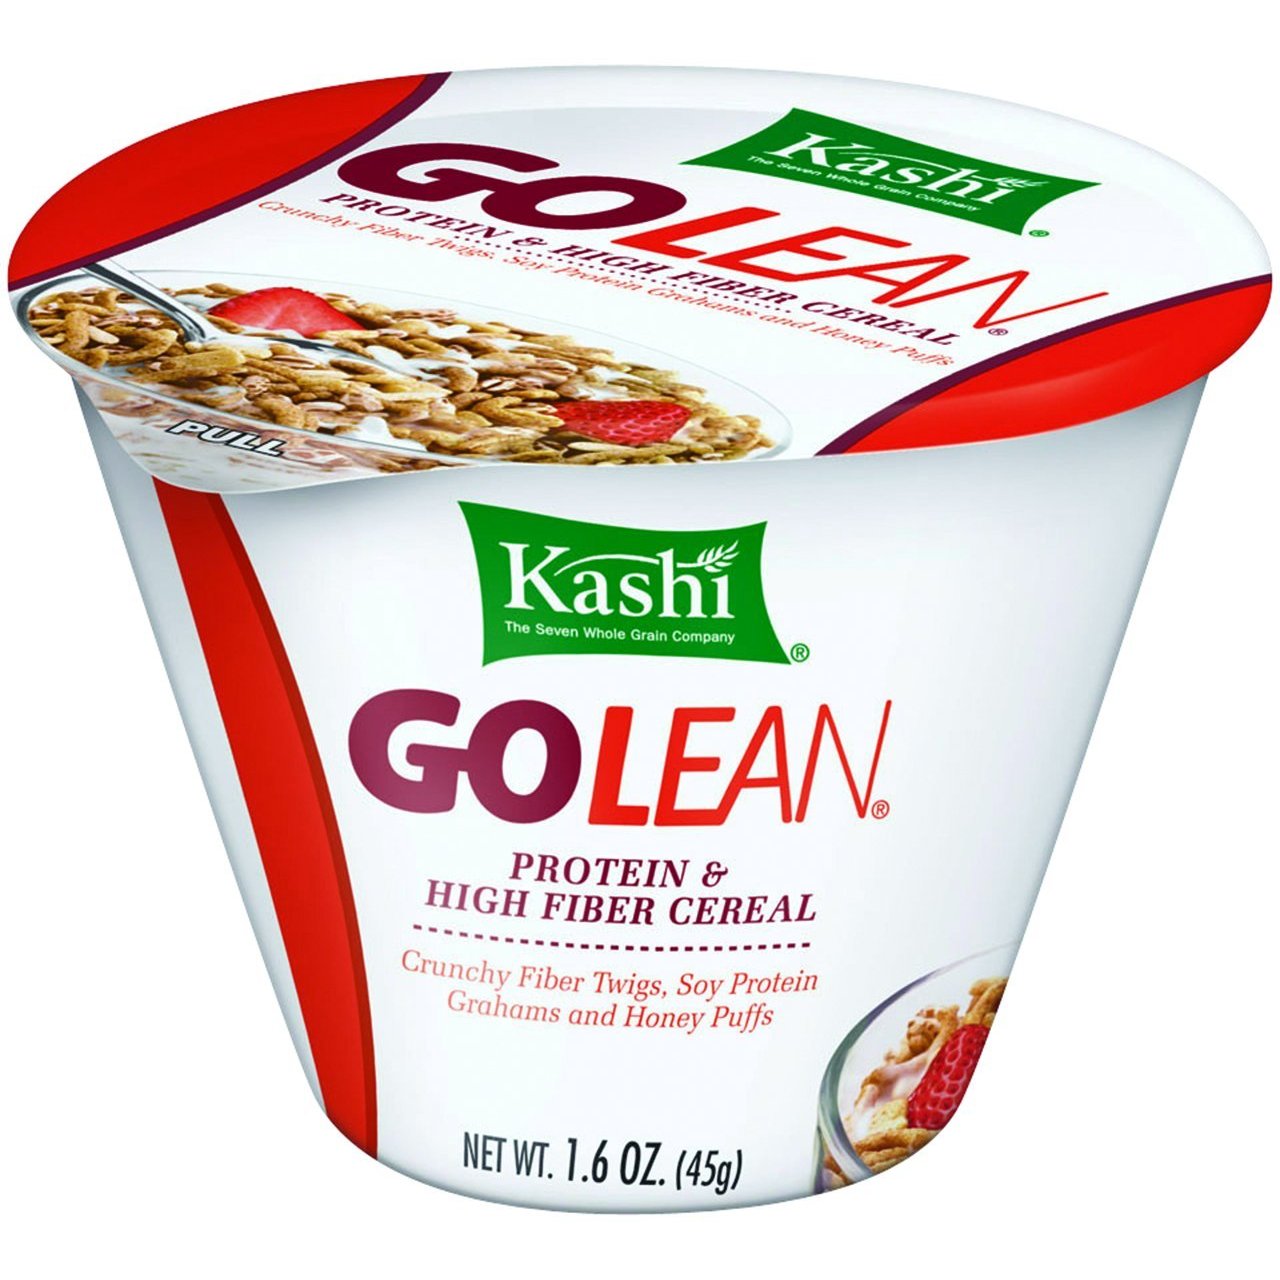 Extreme Couponing Mommy: FREE Kashi To Go Cups with Printable Coupons1280 x 1280